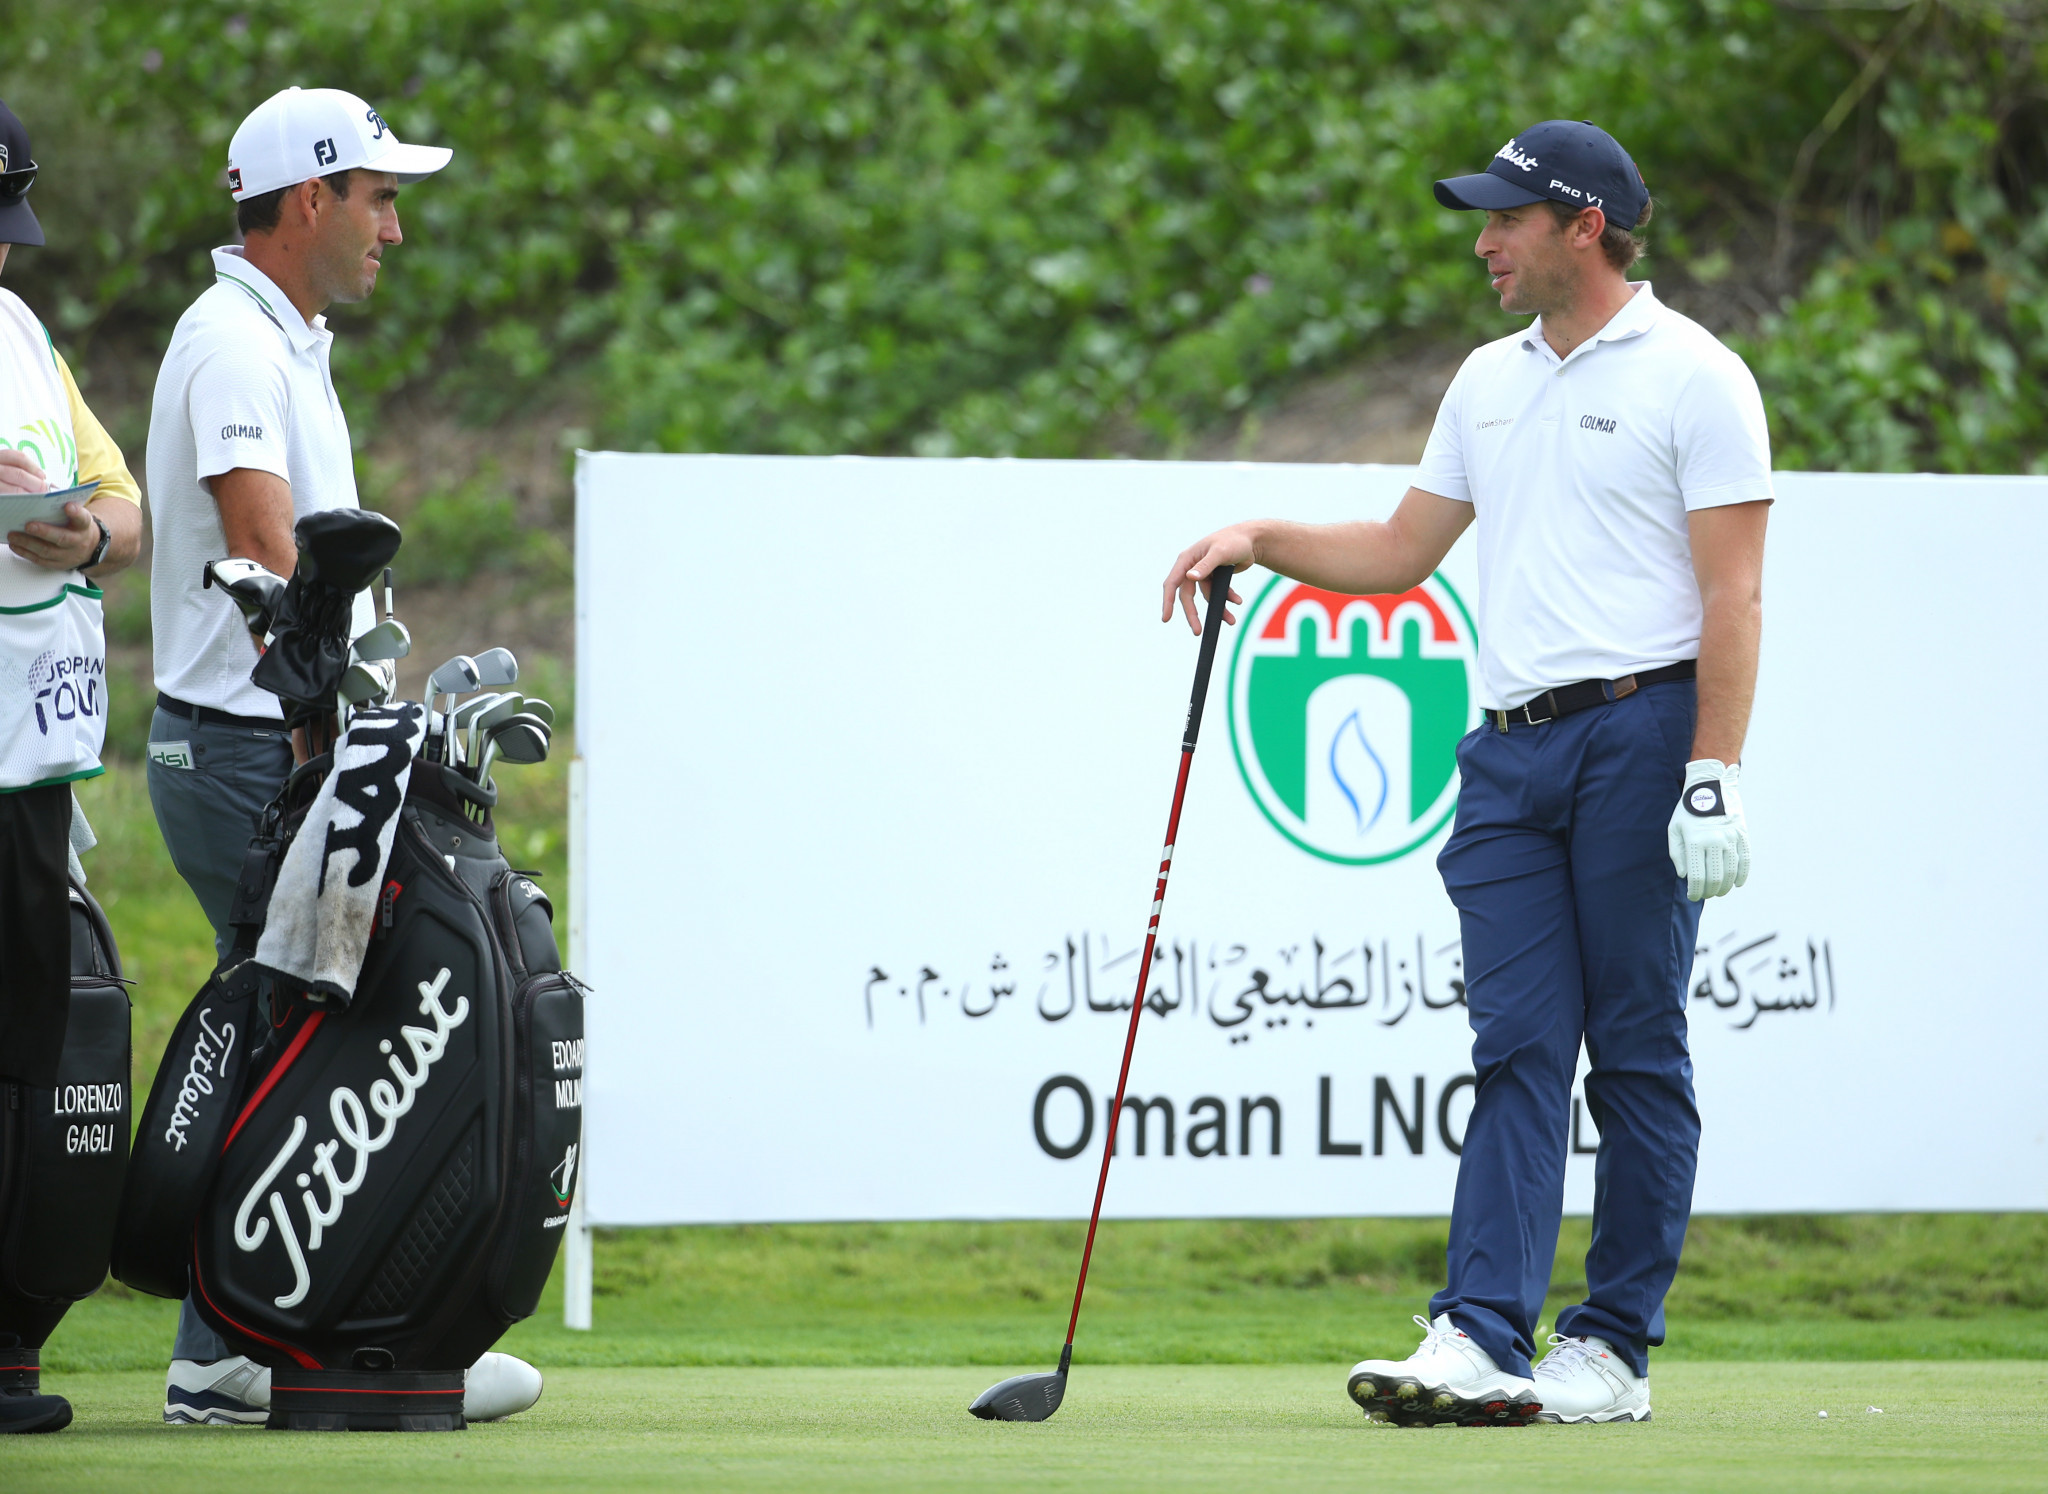 Italian golfers cleared to play at Oman Open after spell in quarantine